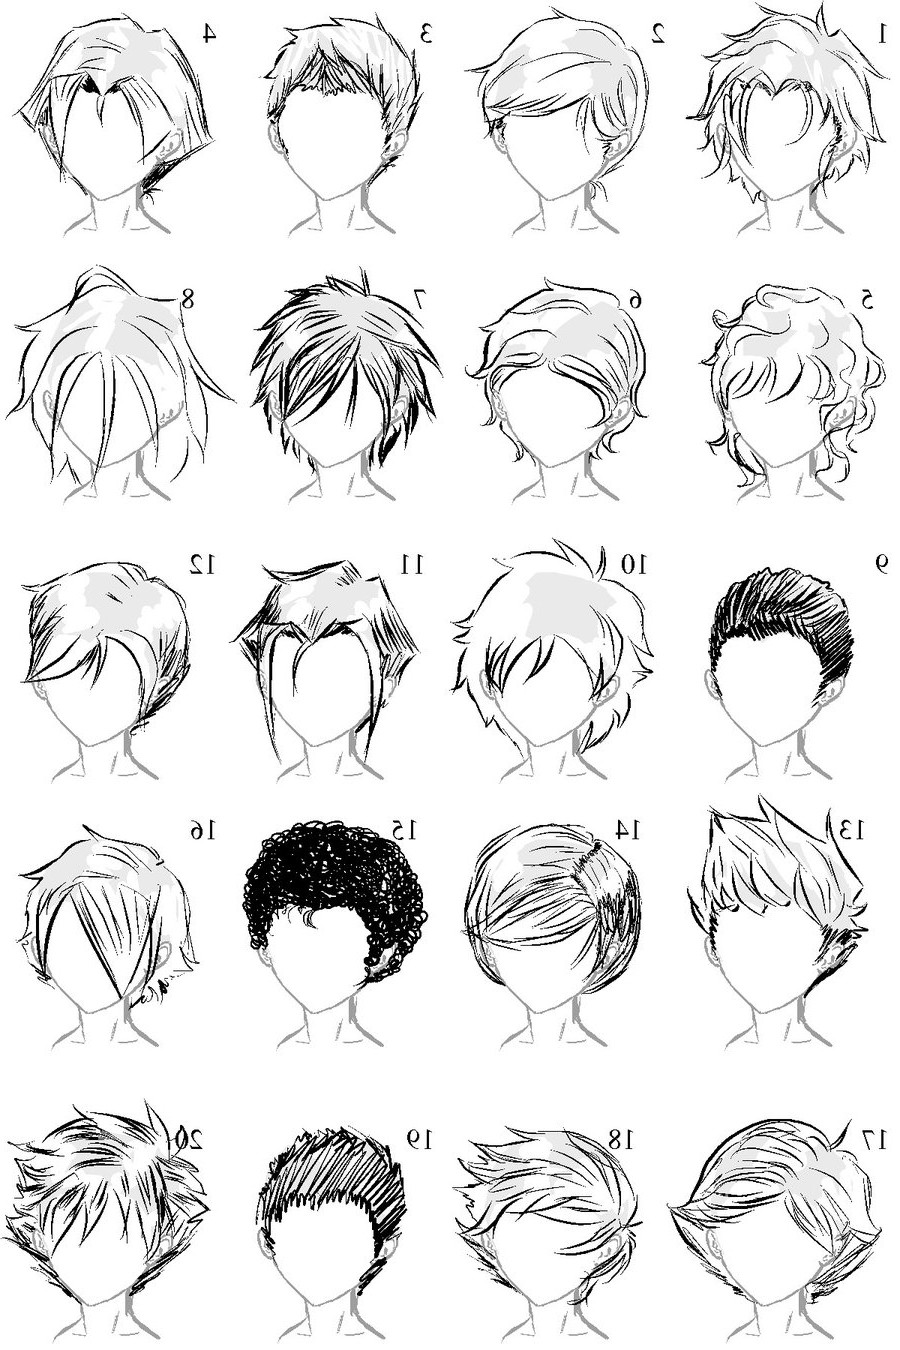 Male Hairstyles Anime
 Male Anime Hairstyles Drawing at PaintingValley